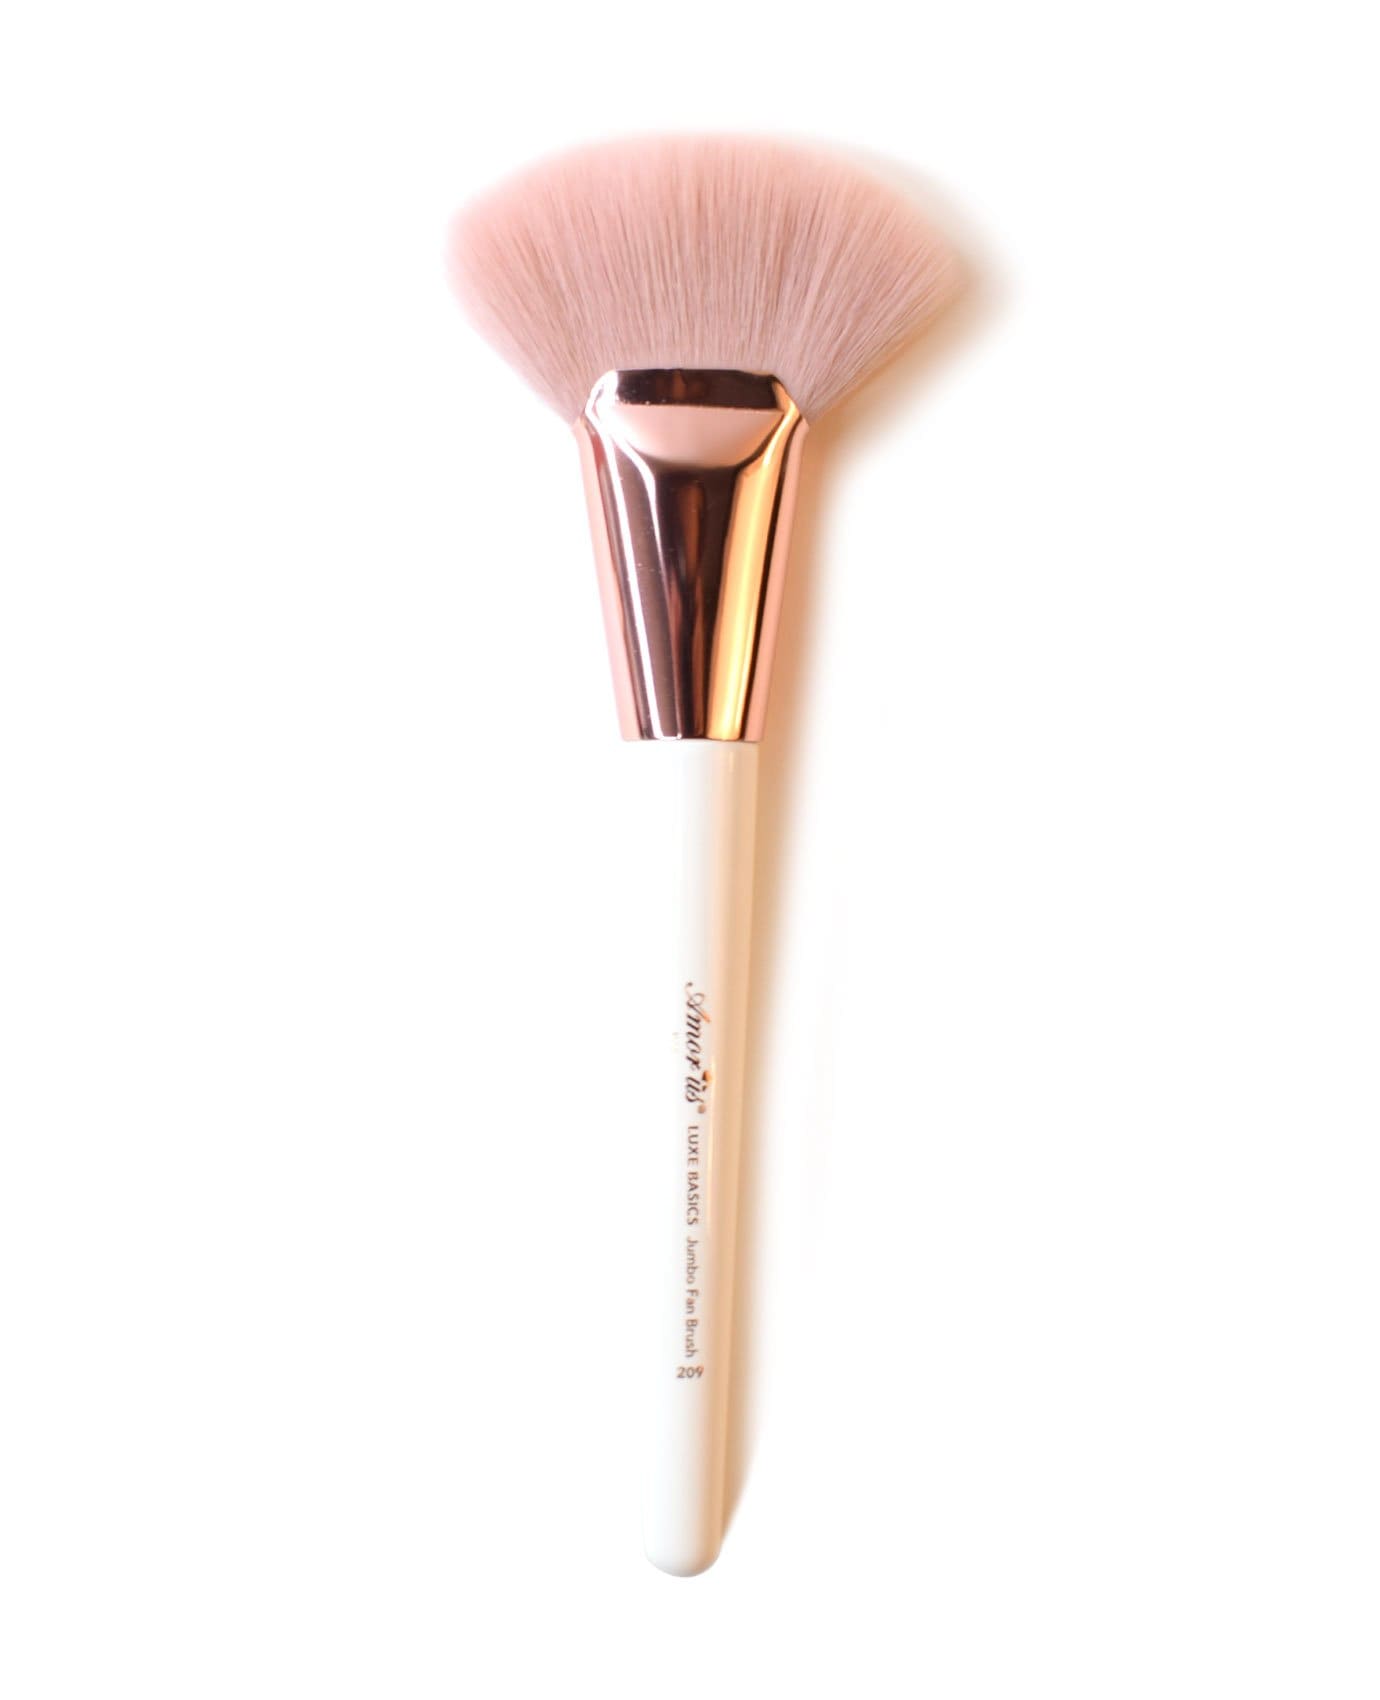 Deluxe Soft Fan Brushes